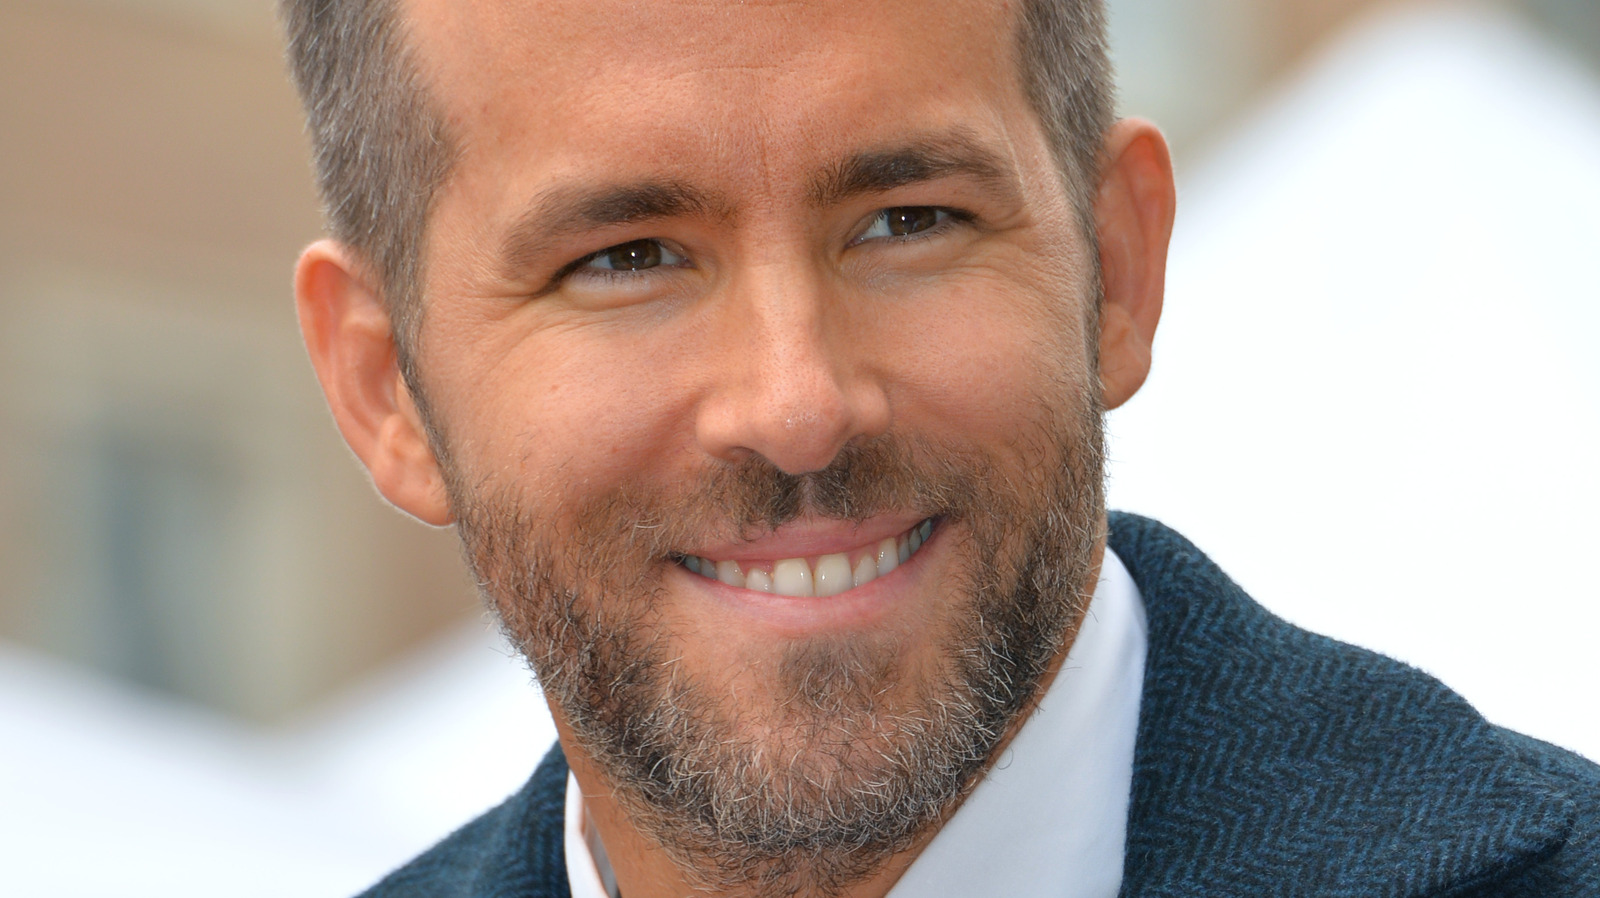 Upcoming Ryan Reynolds Movies You Need To Know About